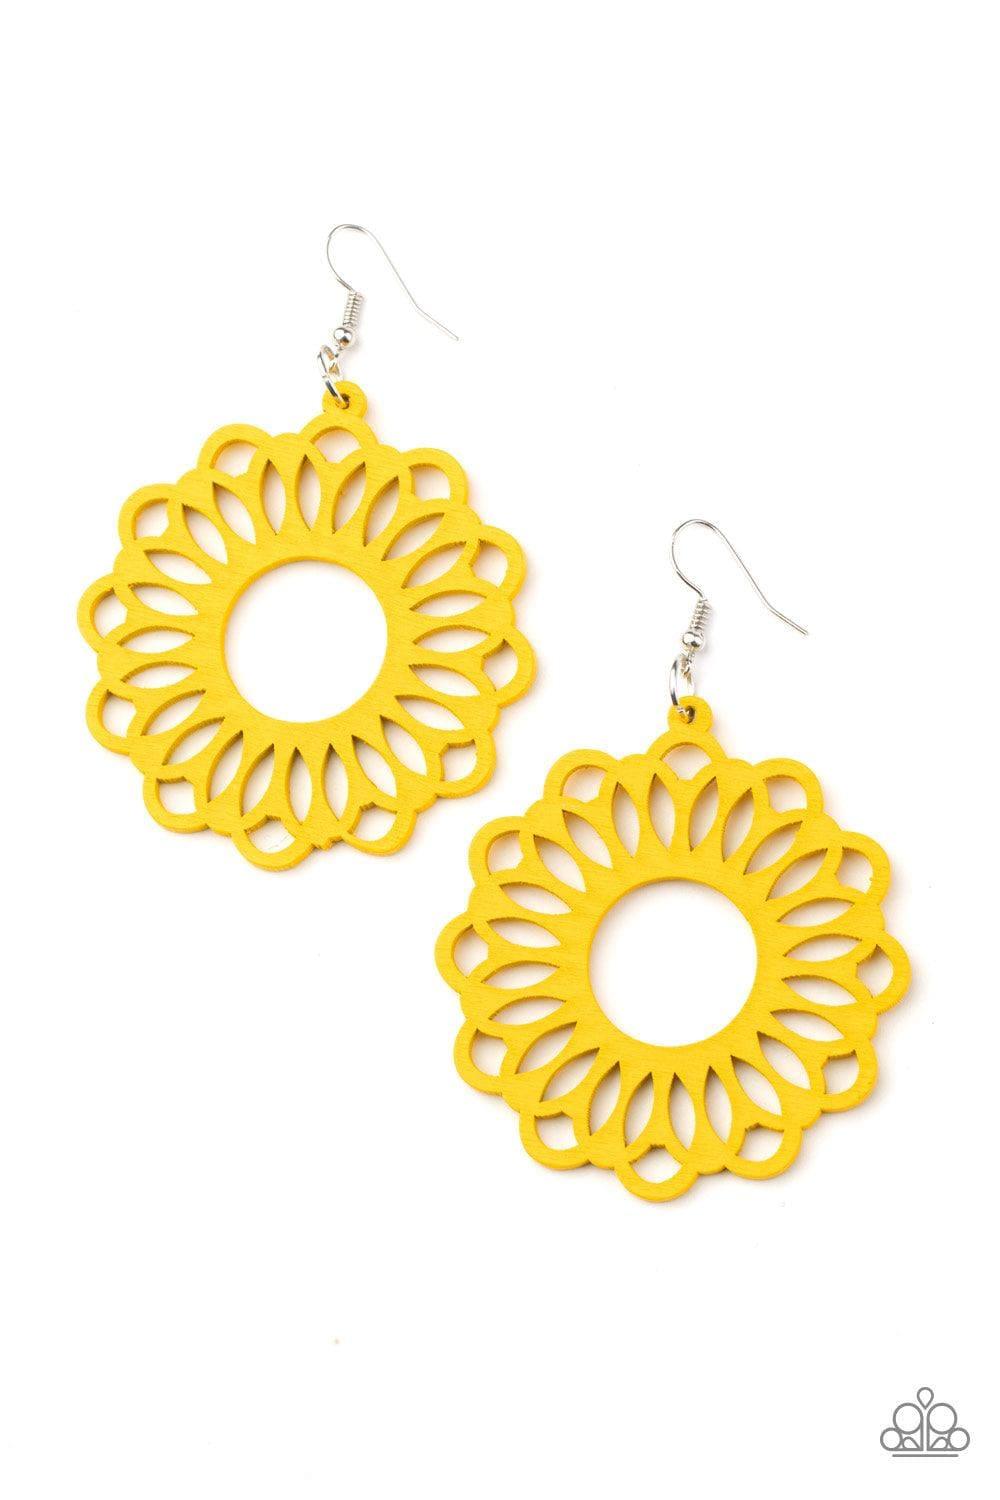 Paparazzi Accessories - Dominican Daisy - Yellow Earrings - Bling by JessieK